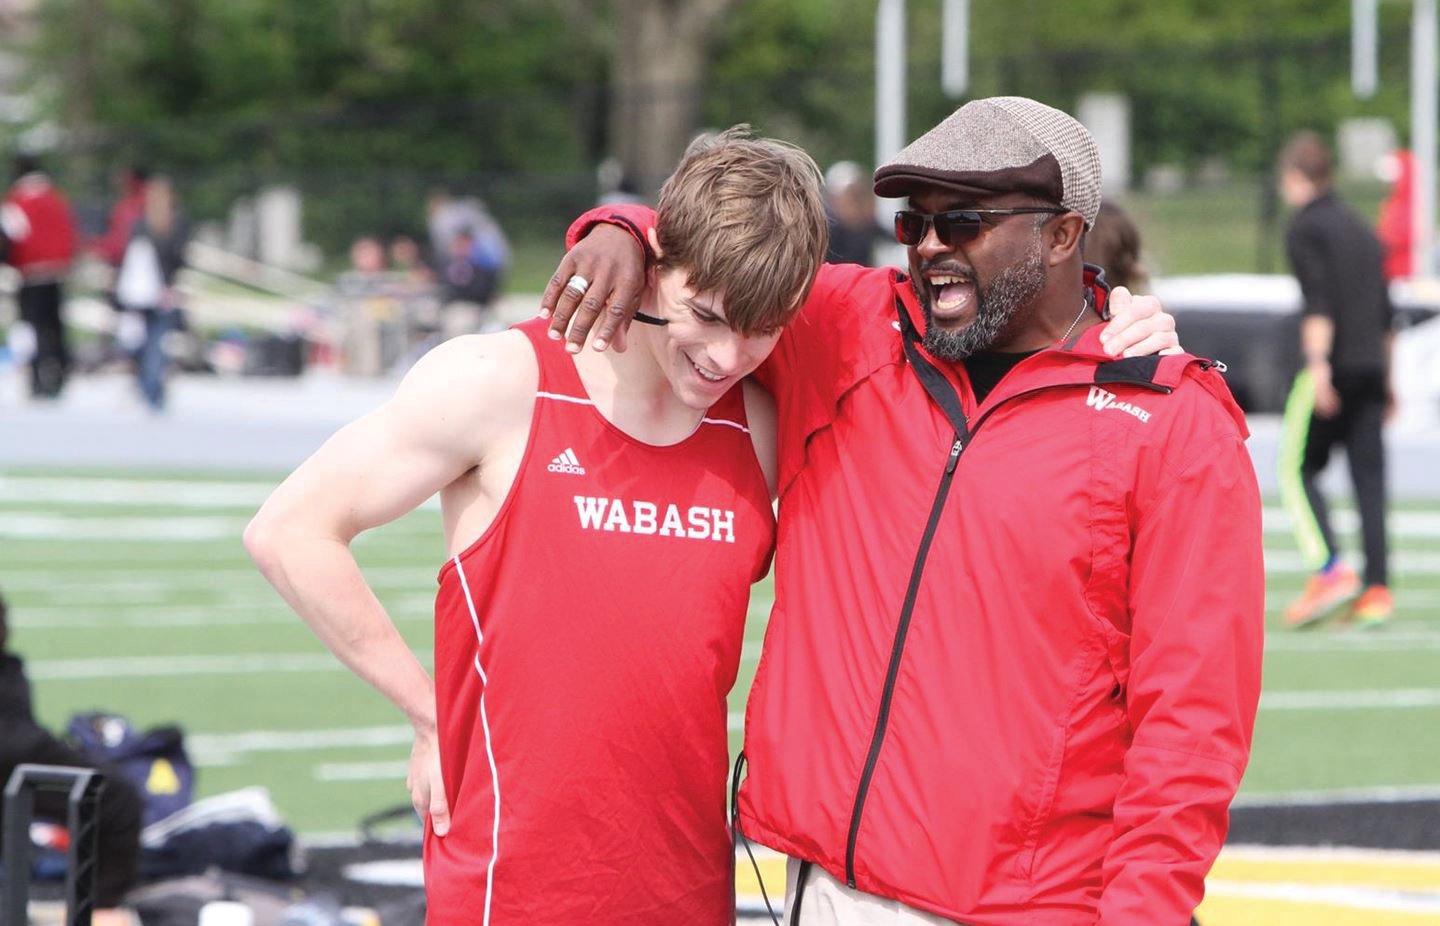 Clyde Morgan has been the Director of Track and Field and Cross Country at Wabash College since 2018 and the head track and field coach since 2008.